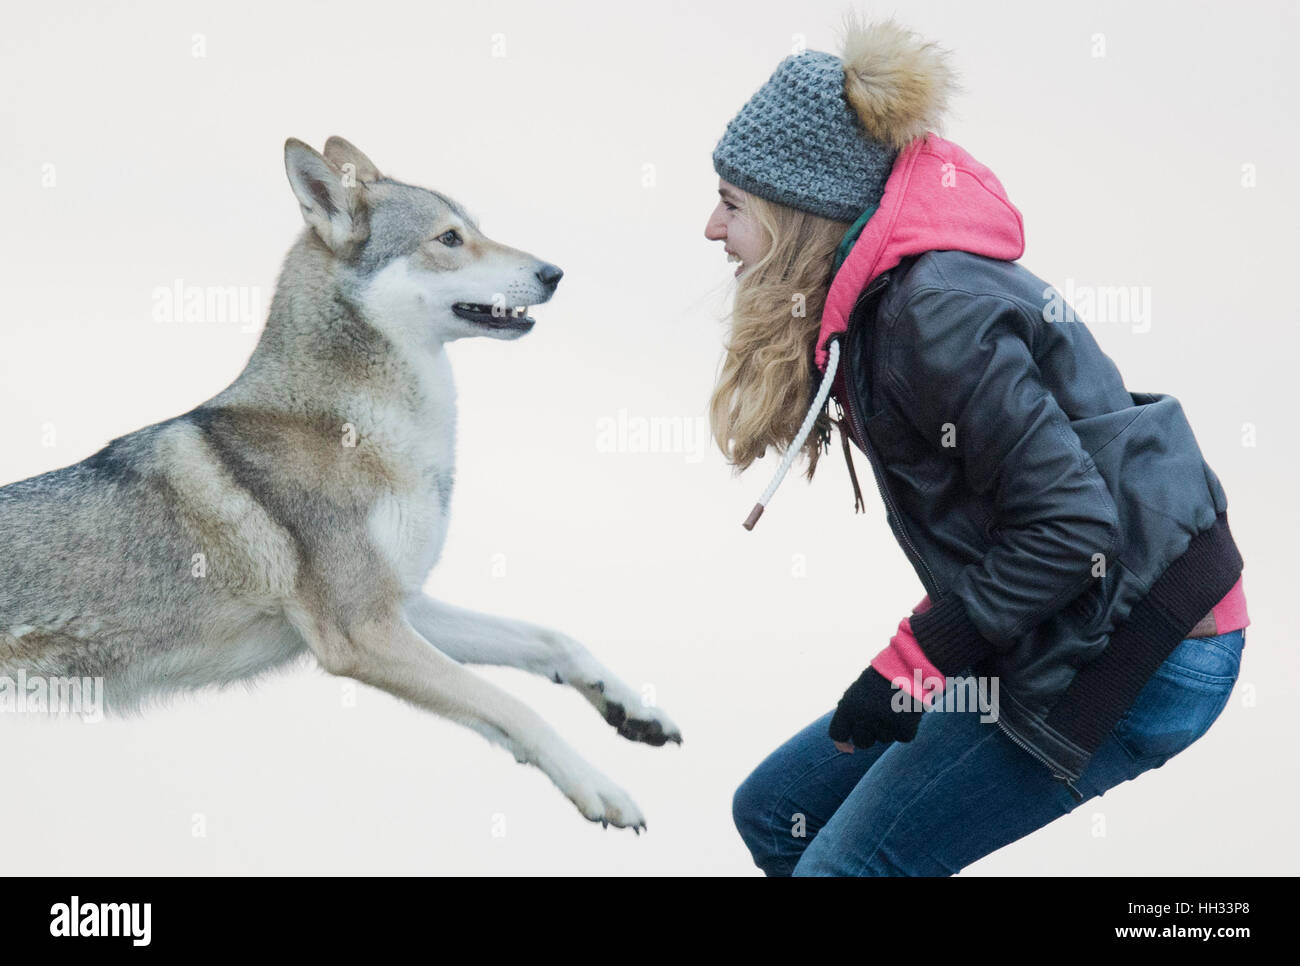 Sehnde, Germany. 10th Jan, 2017. Elsa the Saarloos wolfdog and her owner Daria Mathiaszyk playing on a path in a field near Sehnde, Germany, 10 January 2017. Domesticated wolfdogs are sometimes mistaken for wild wolves. Photo: Julian Stratenschulte/dpa/Alamy Live News Stock Photo